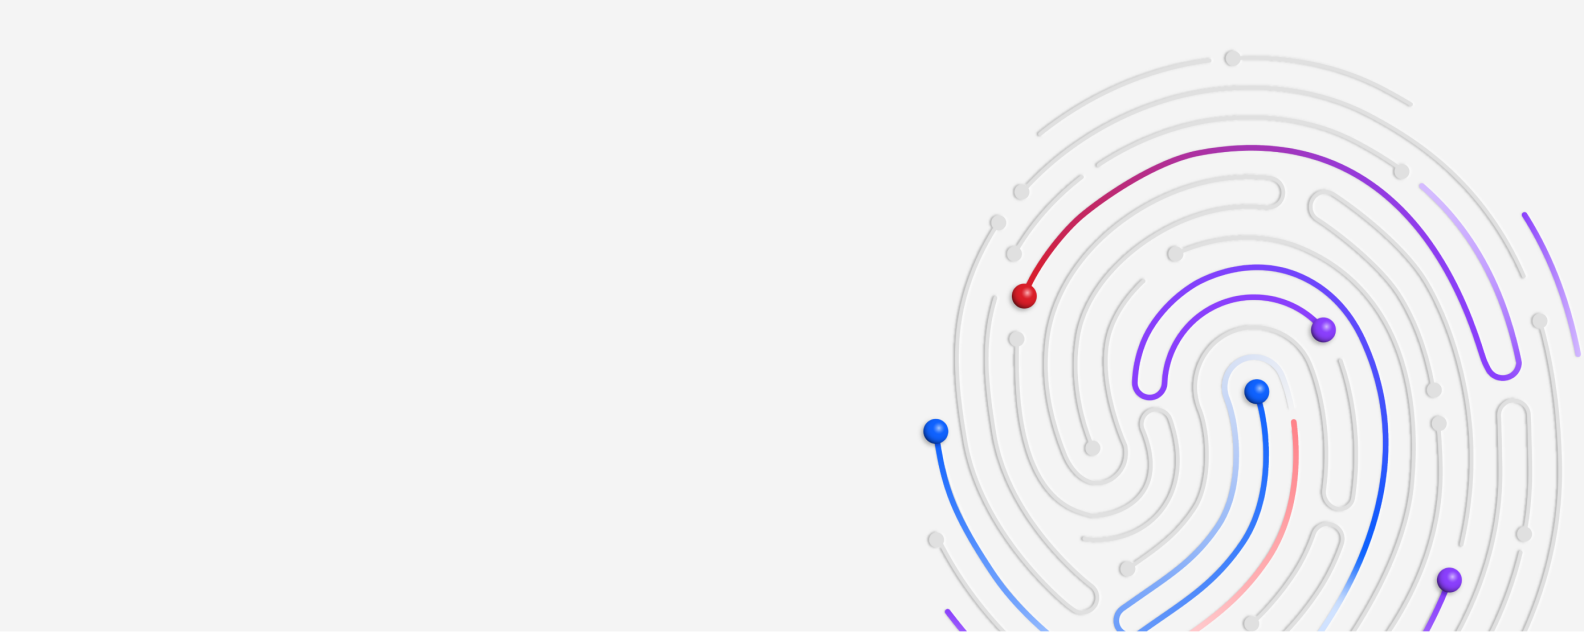 Thumbprint illustration with red, blue and purple swirls indicating potential cyberthreats